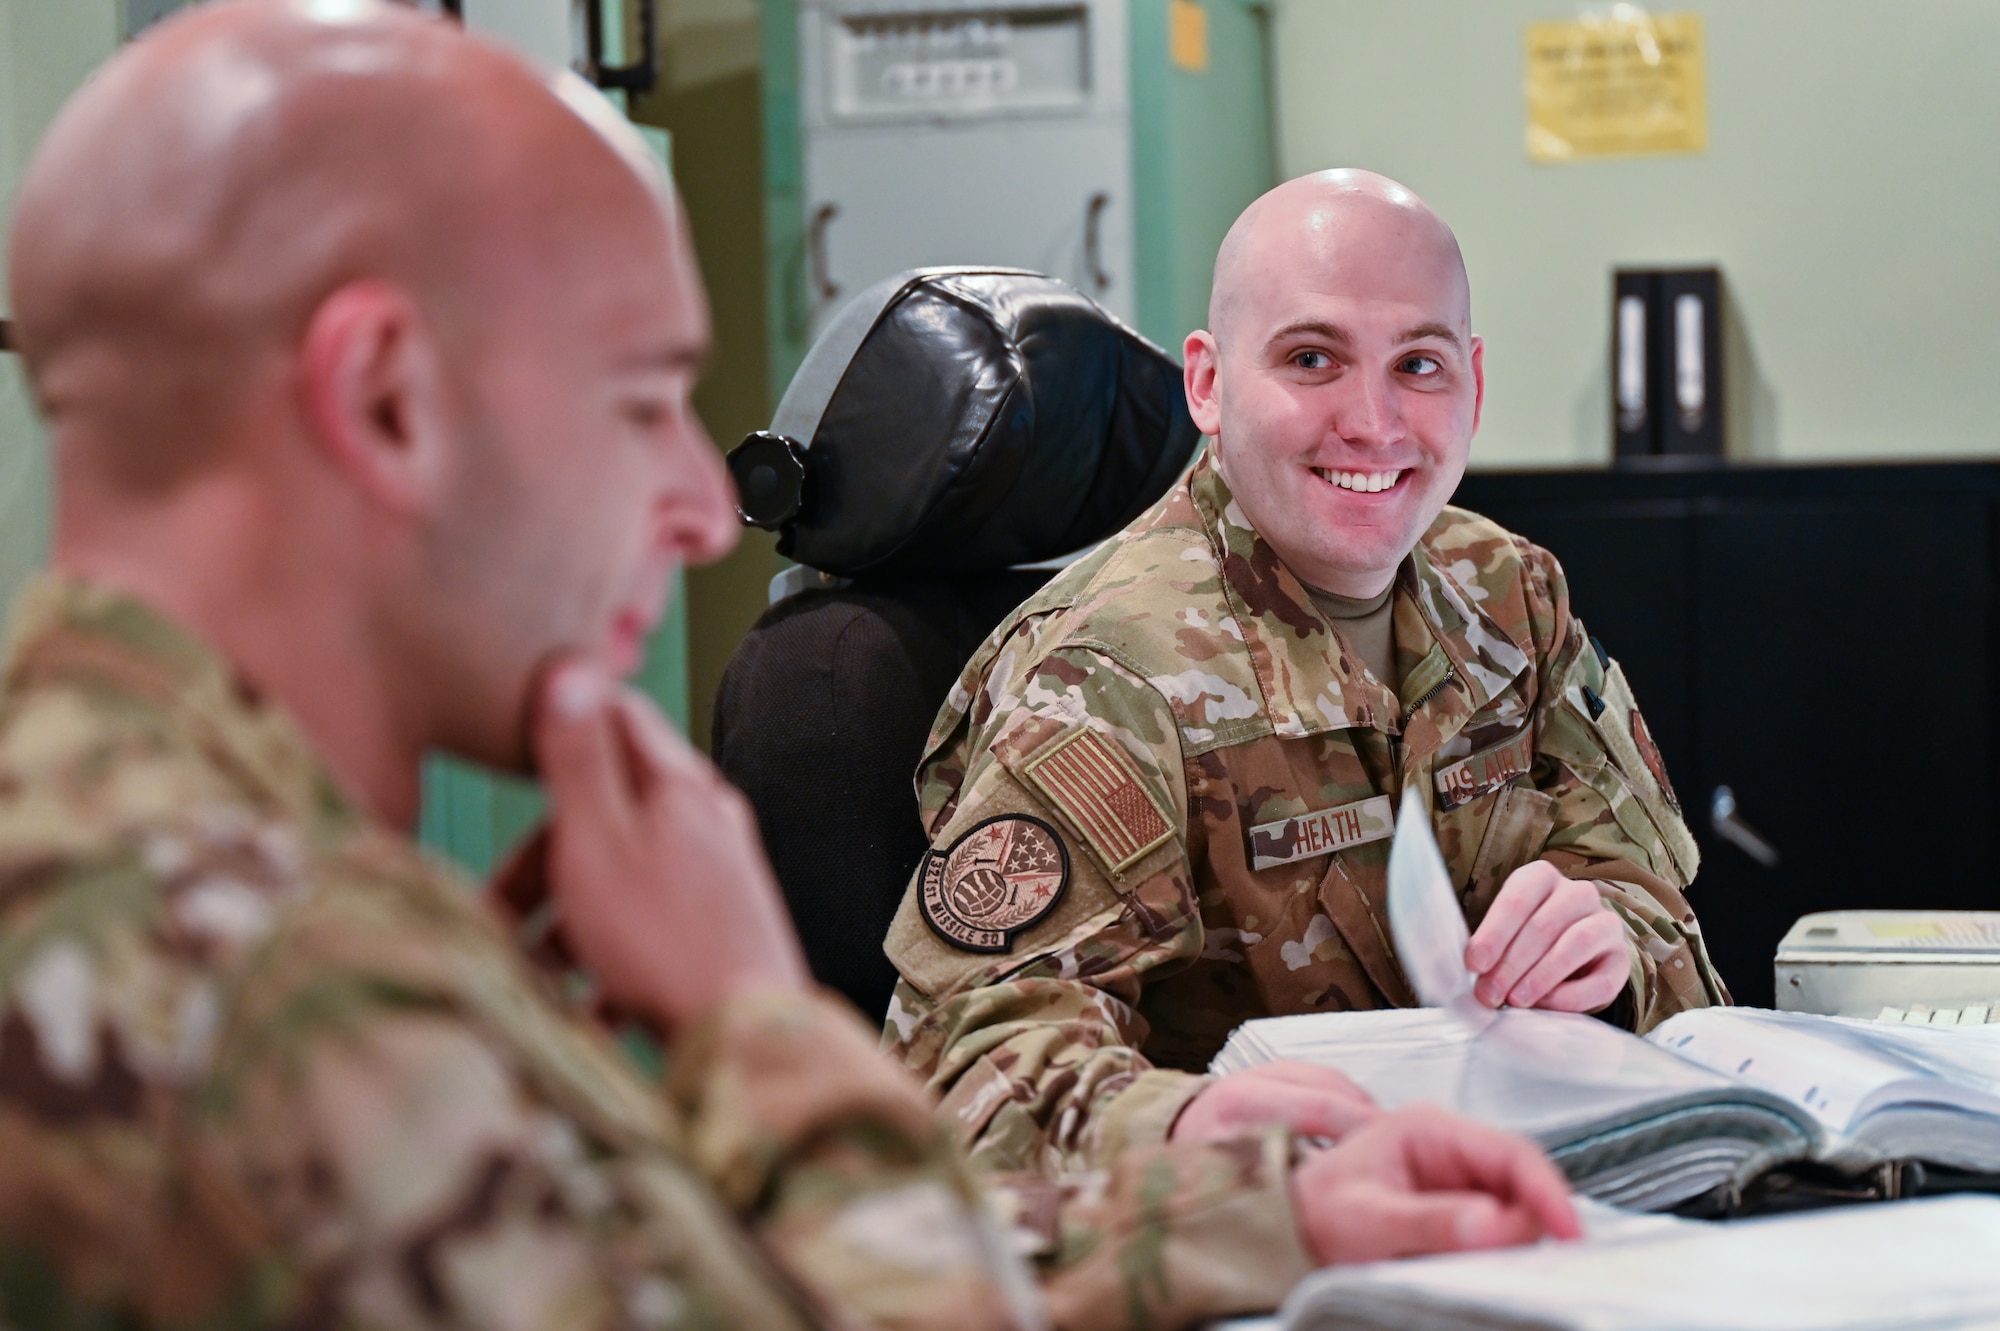 pt. Christian Heath, 321st Missile Squadron, discusses a procedural checklist with 1st Lt. Juan Navarro, 321 MS, during training in the Missile Procedures Trainer on F.E. Warren Air Force Base, Wyoming, June 17, 2021. The Air Force Association awarded Heath and Navarro the 2020 Gen. Thomas S. Power Outstanding Missile Crew Award. (U.S. Air Force photo by Joseph Coslett)